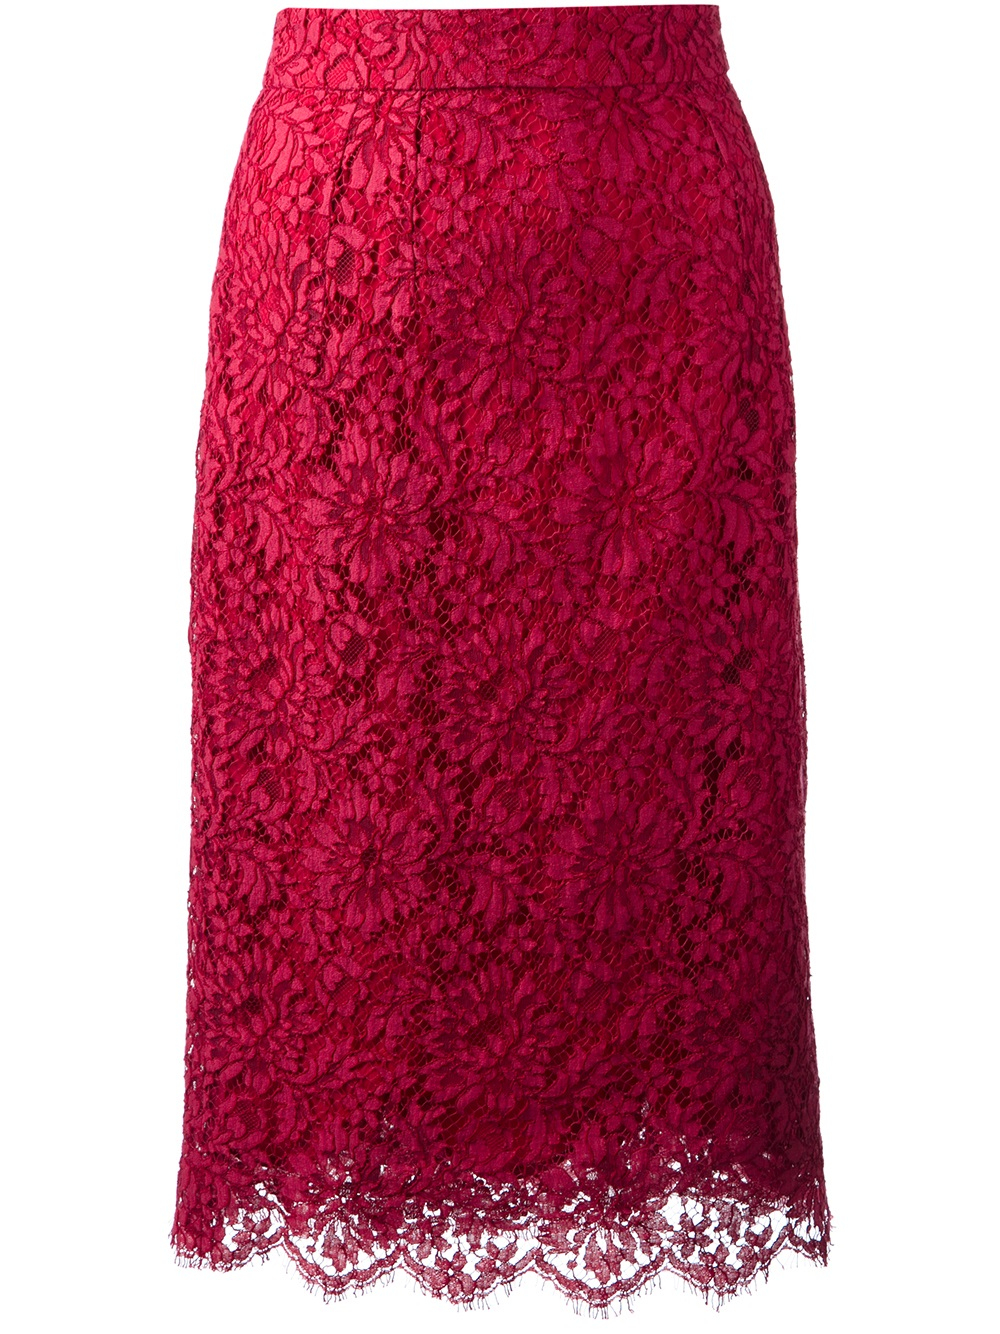 Dolce & Gabbana Floral Lace Skirt in Red - Lyst